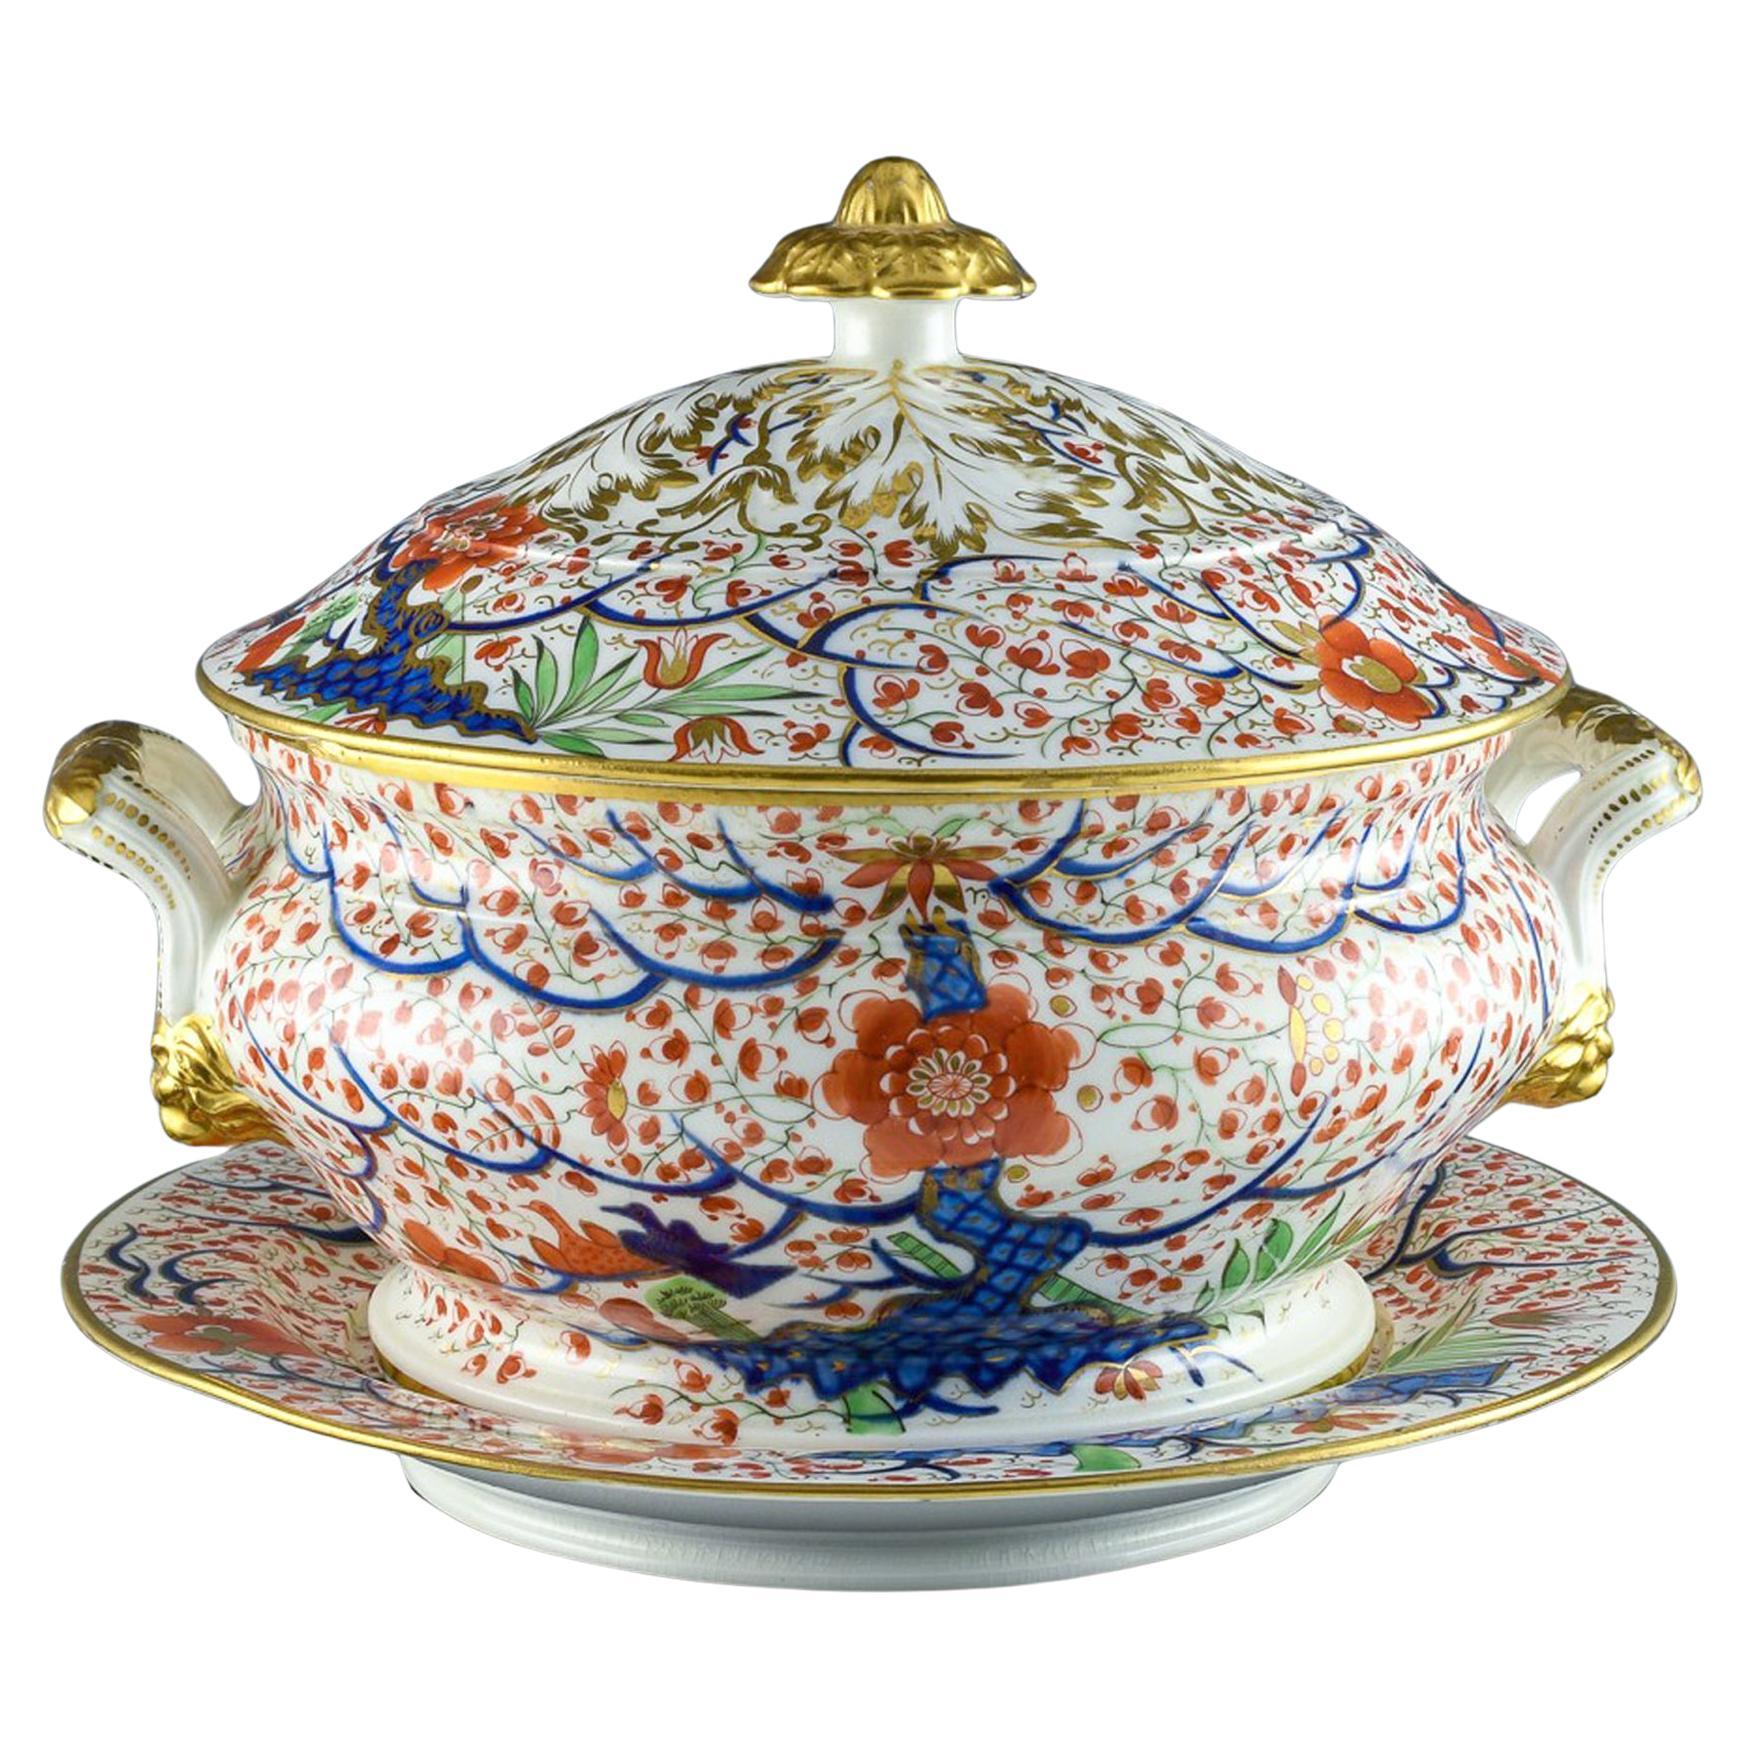 Regency Period Chamberlain Worcester Porcelain Soup Tureen, Cover and Stand For Sale